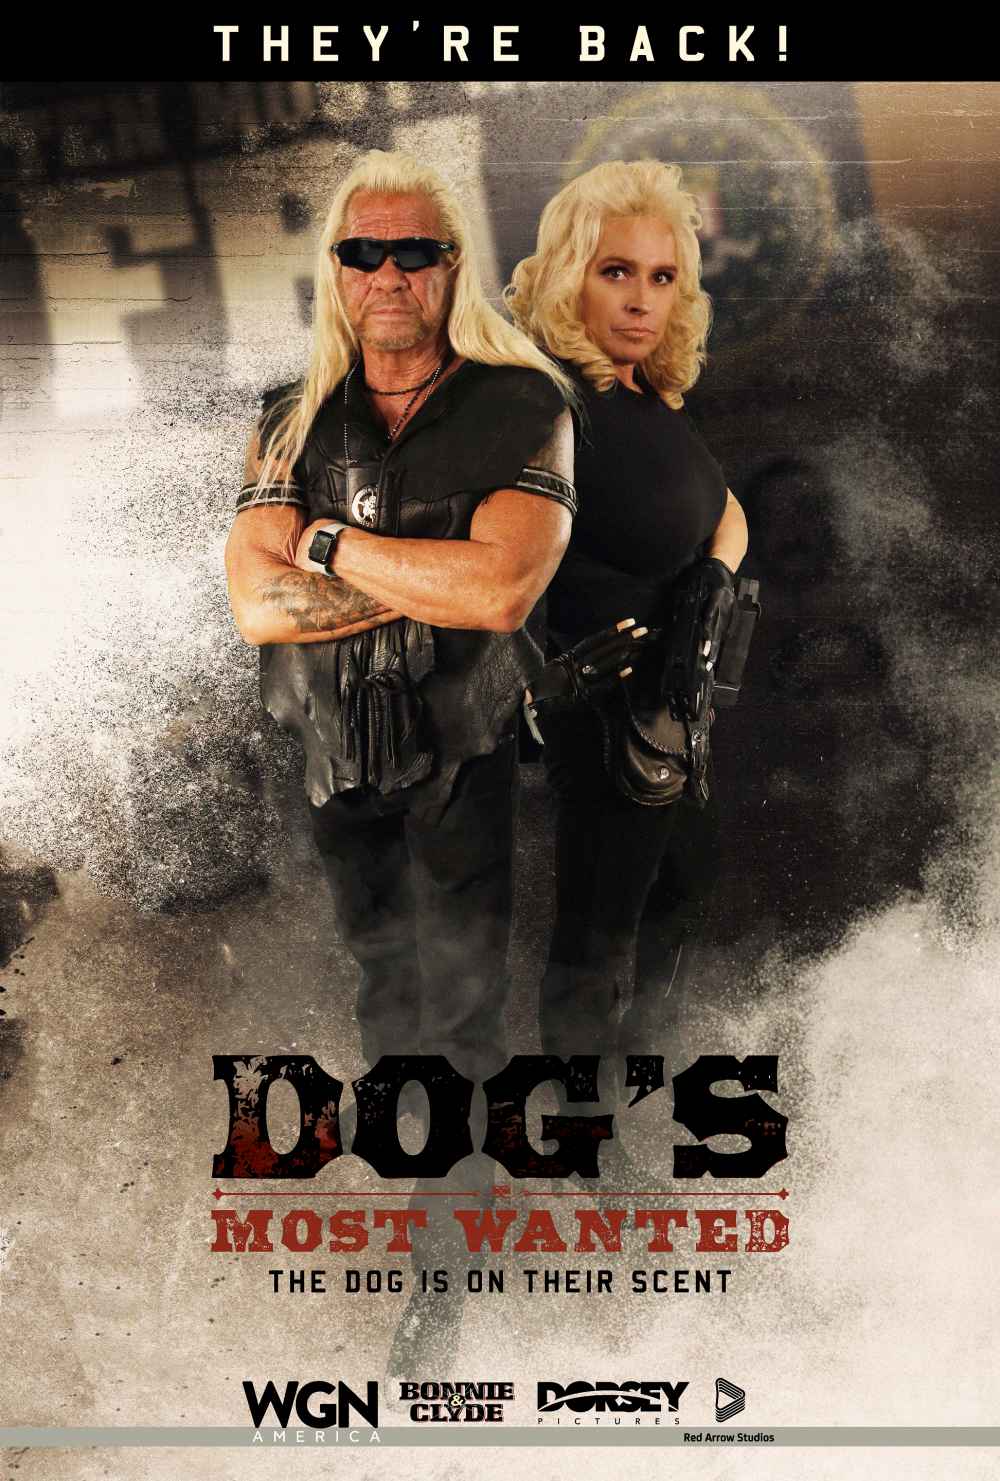 Dog the Bounty Hunter and Wife Beth Return for New Series